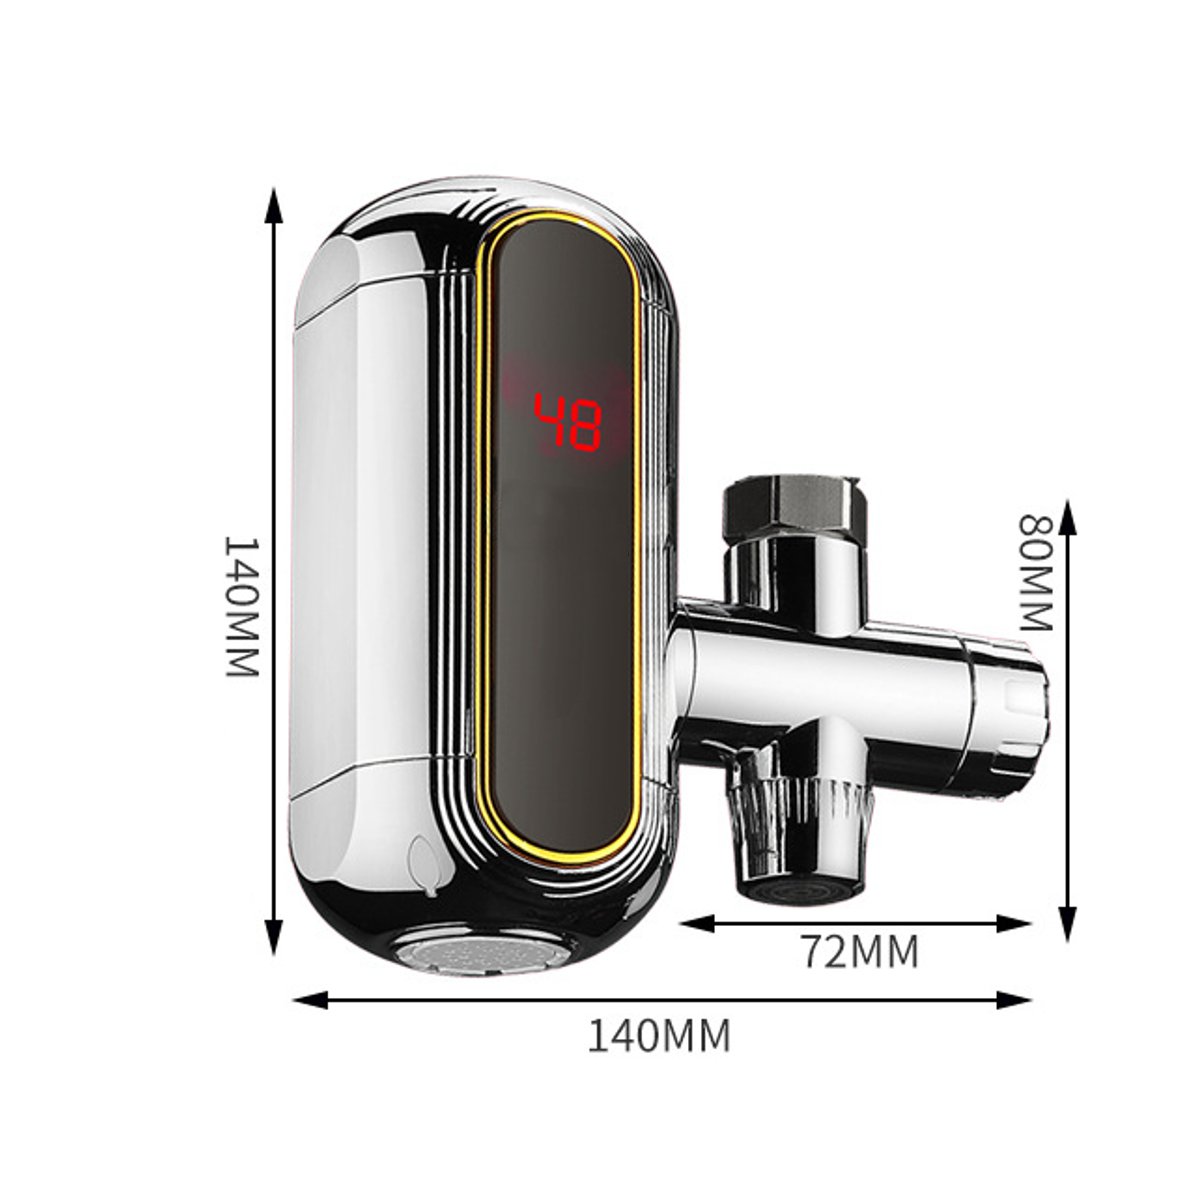 220V-3000W-Tankless-Electric-Water-Heater-Faucet-LCD-Display-3s-Instant-Heating-Tap-1403166